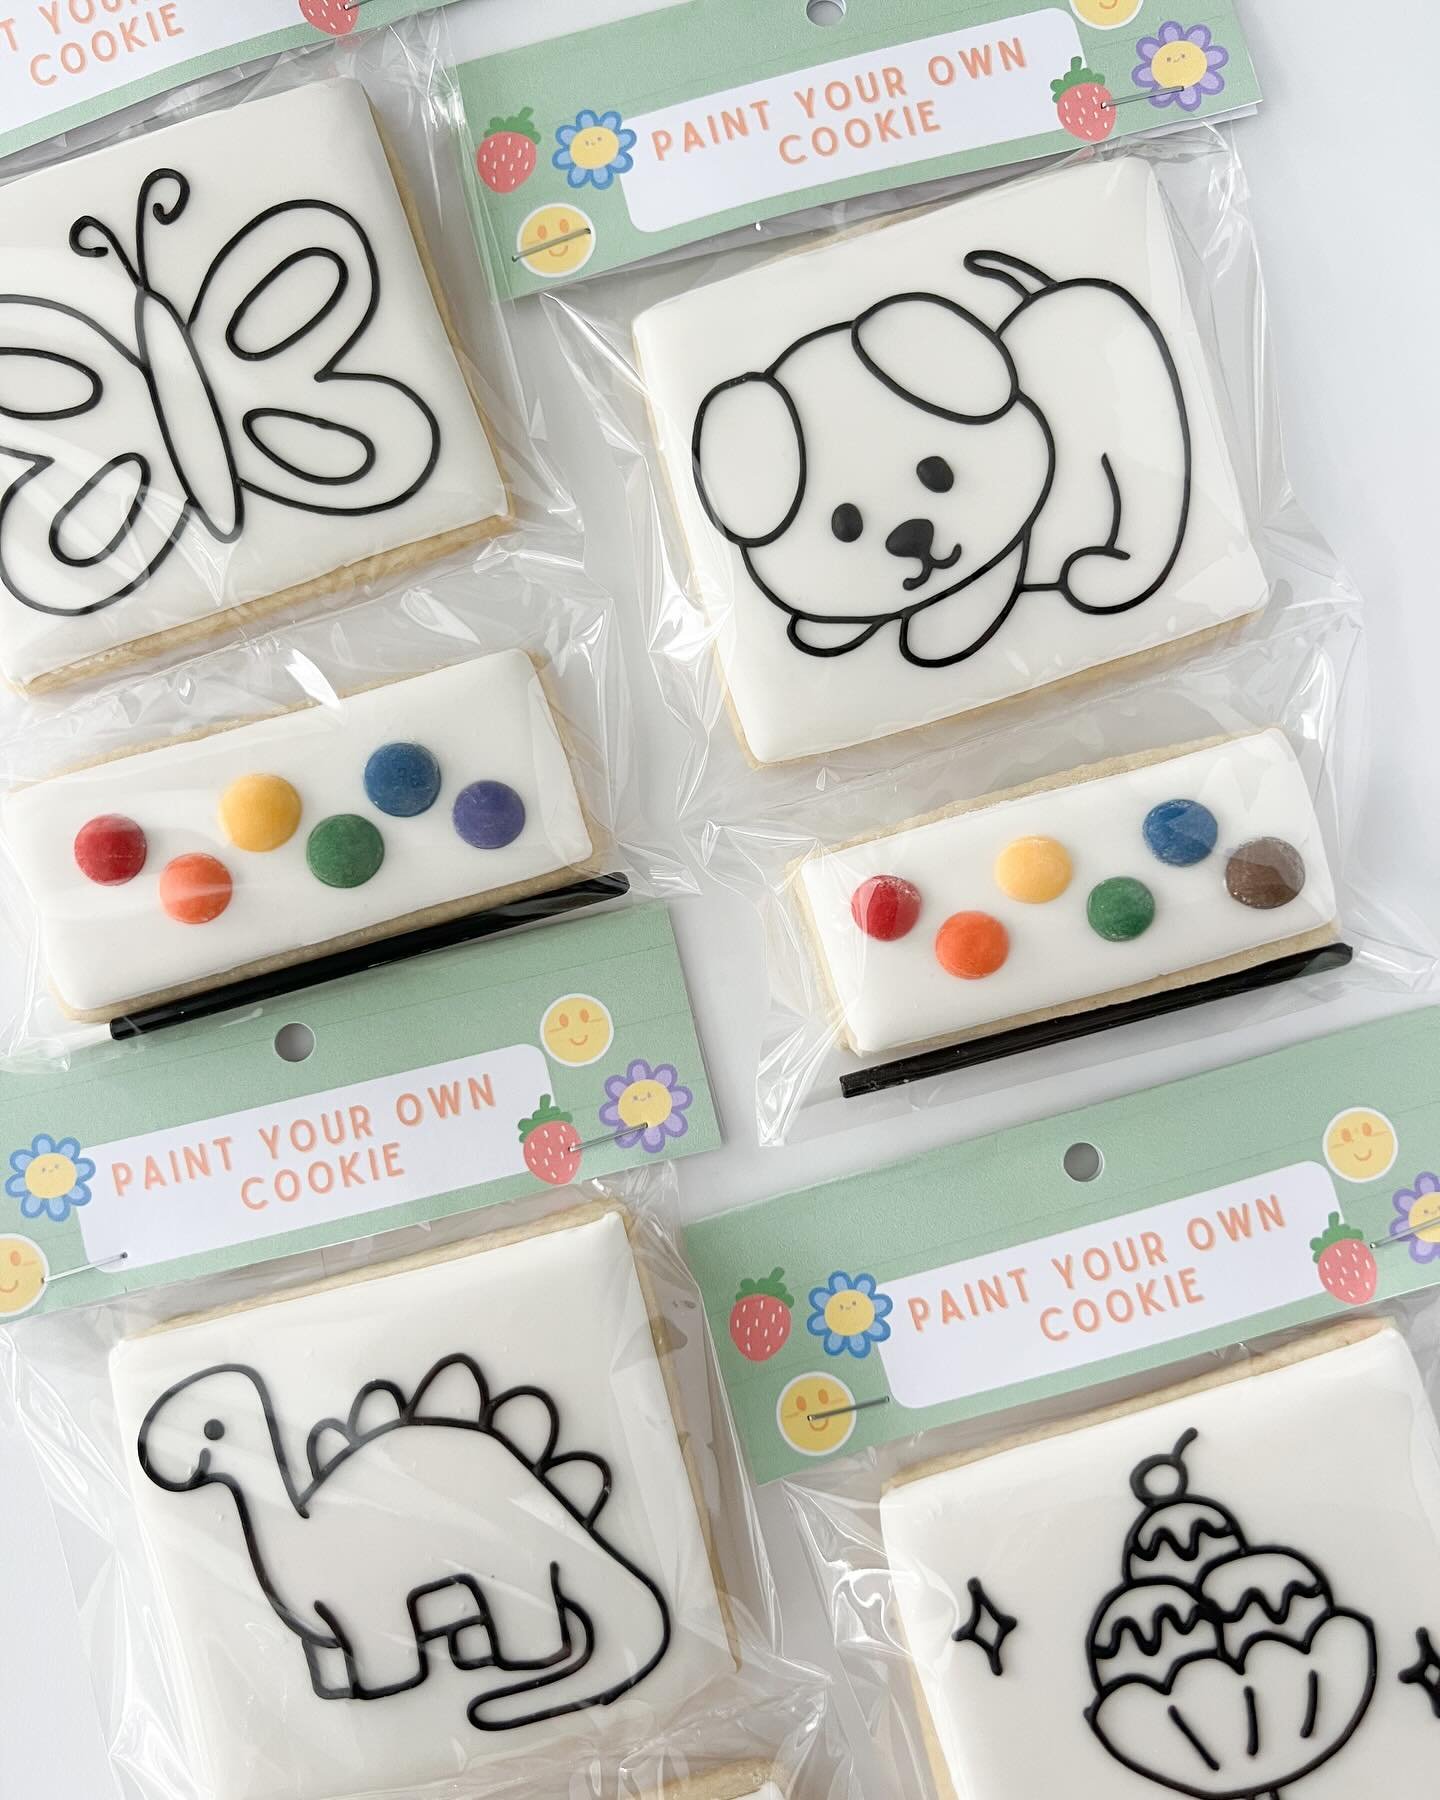 Paint Your Own Cookies ($5 each) available for purchase this weekend! Daly City pick up or local delivery 😊

INSTRUCTIONS 🎨
1. Dip the brush in water and use the edible color palette to paint on the cookie 
2. Don&rsquo;t use too much water, to kee